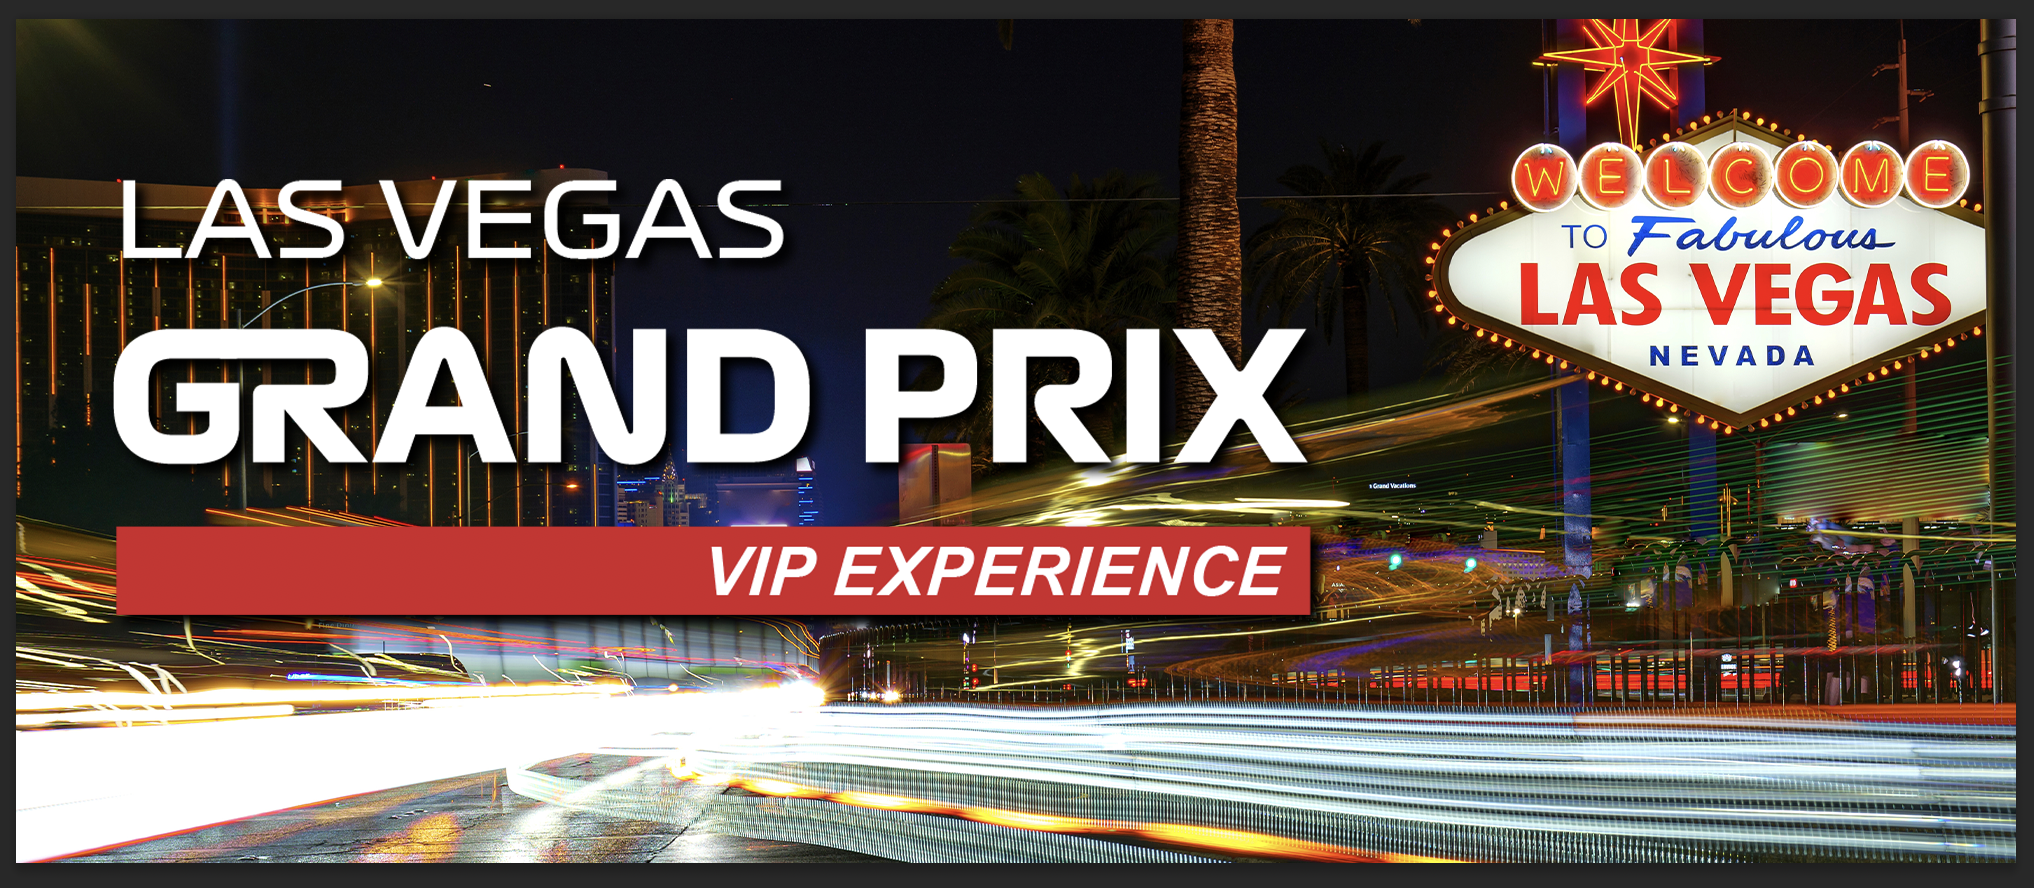 Discount Las Vegas Grand Prix tickets available for Nevada